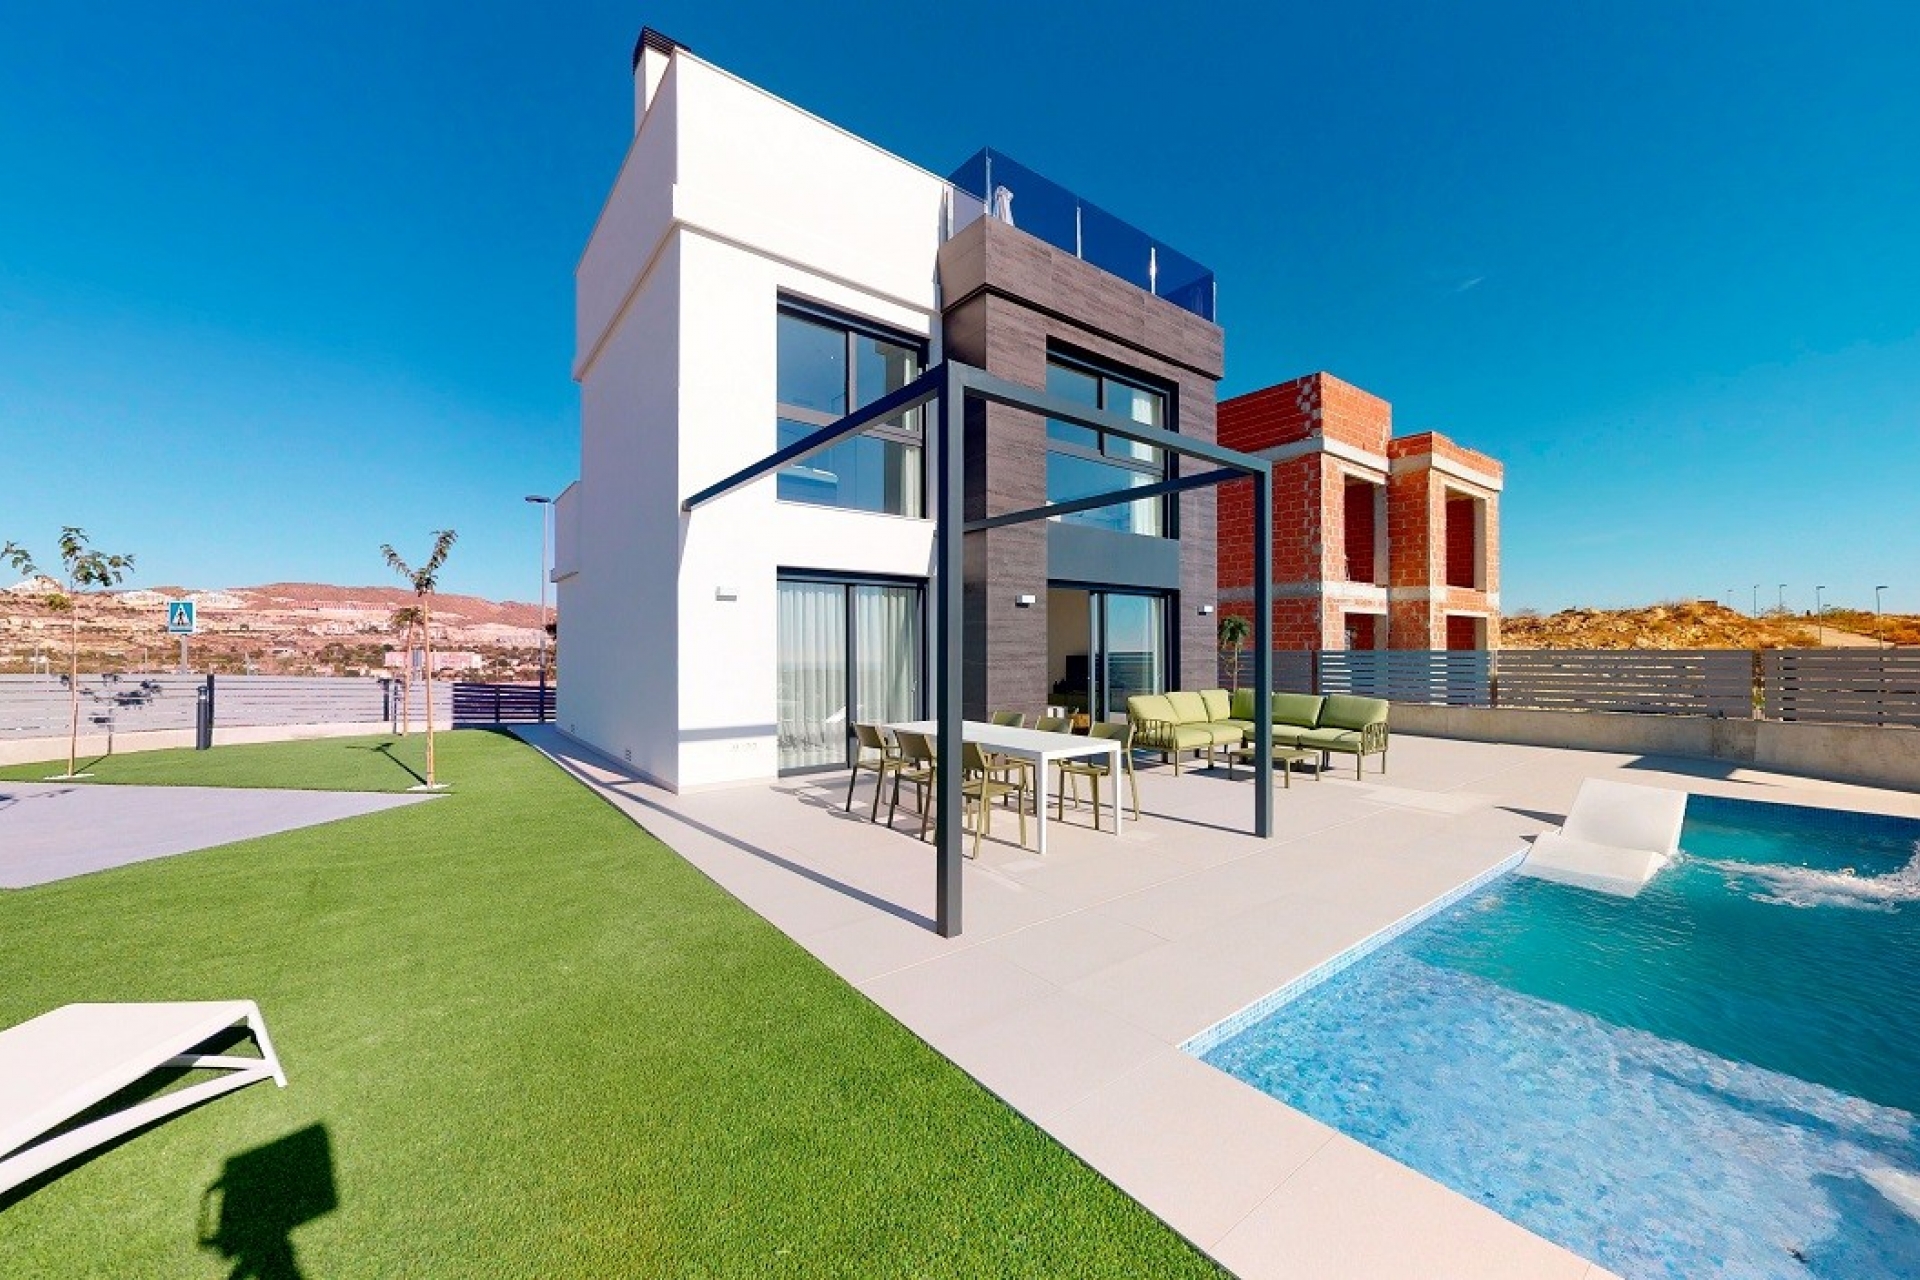 New Property for sale - Villa for sale - Muchamiel